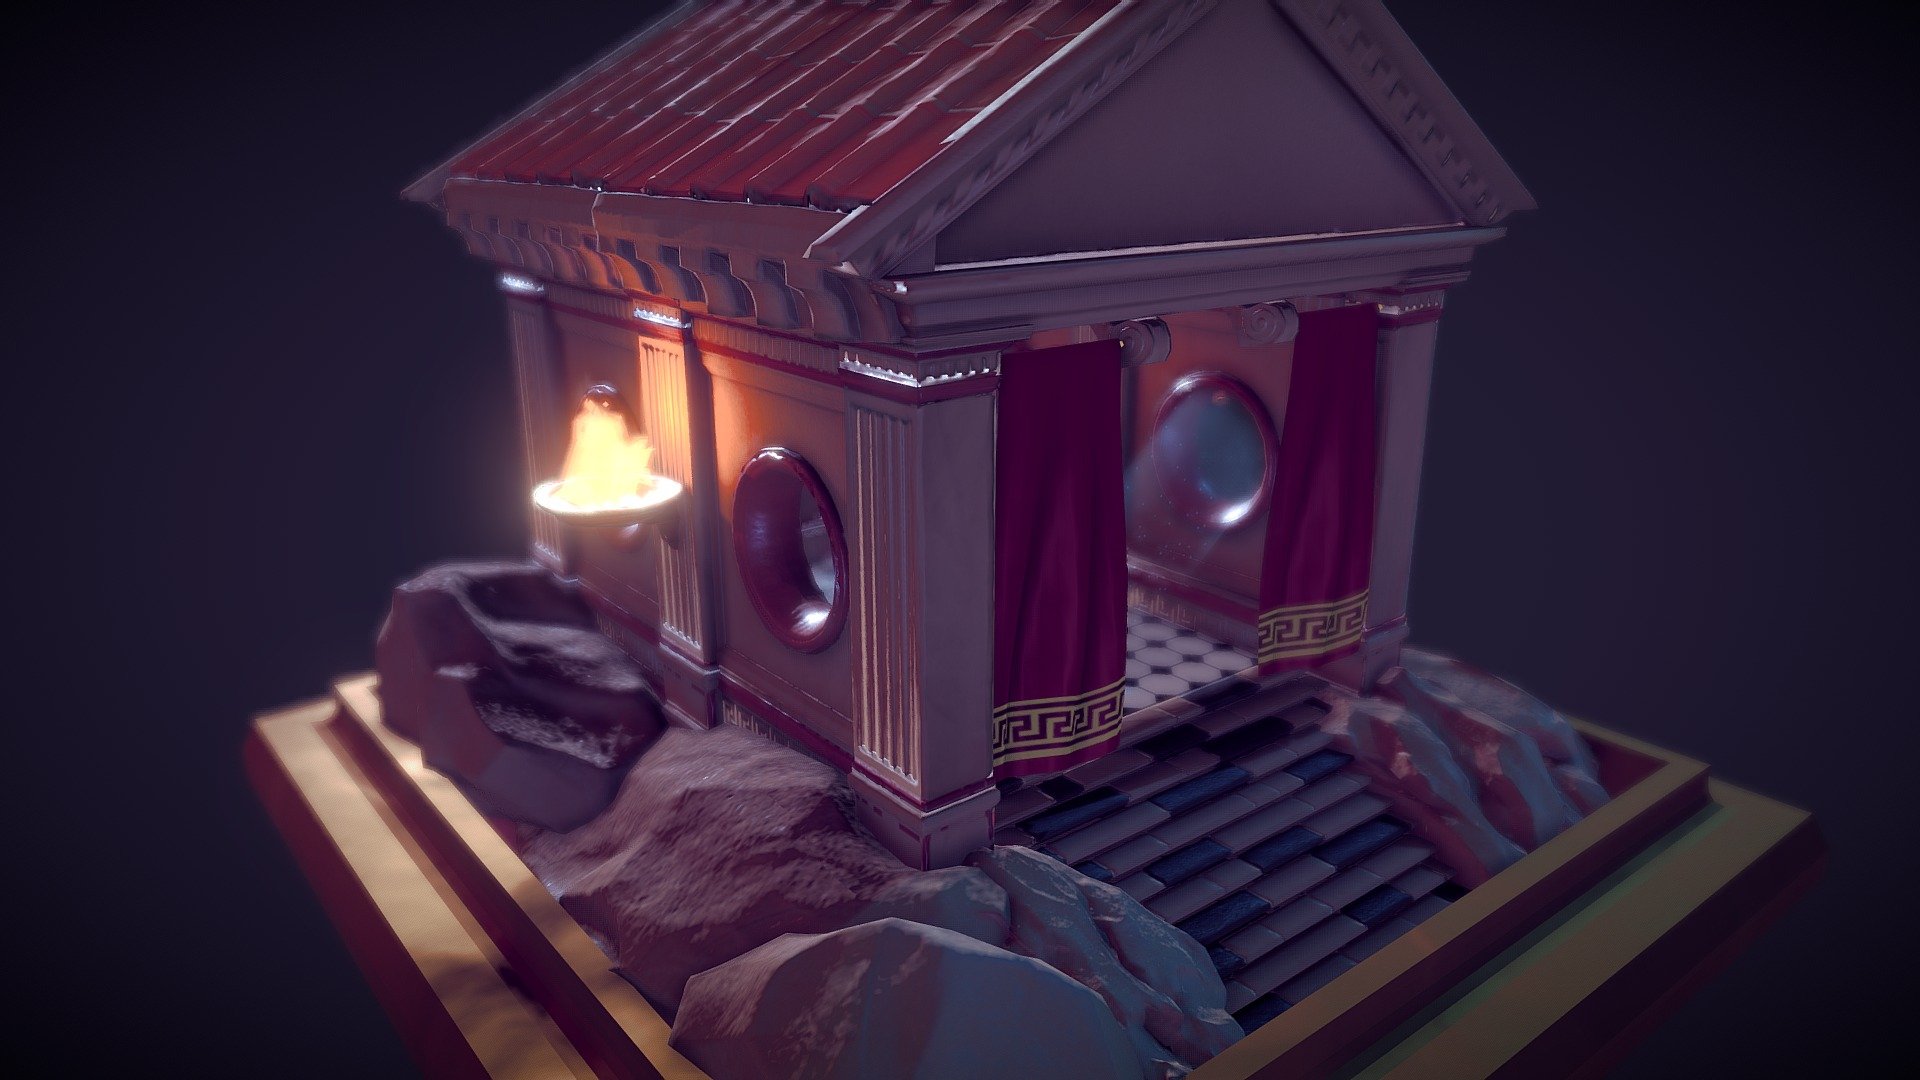 A second building using my modular temple kit :)

I tried to go for a temple exterior/interior at night to check if I could get a proper mood and lighting done.

Like before, all textured inside Quixel Suitte.
Baked lighting was done in Blender 3d model